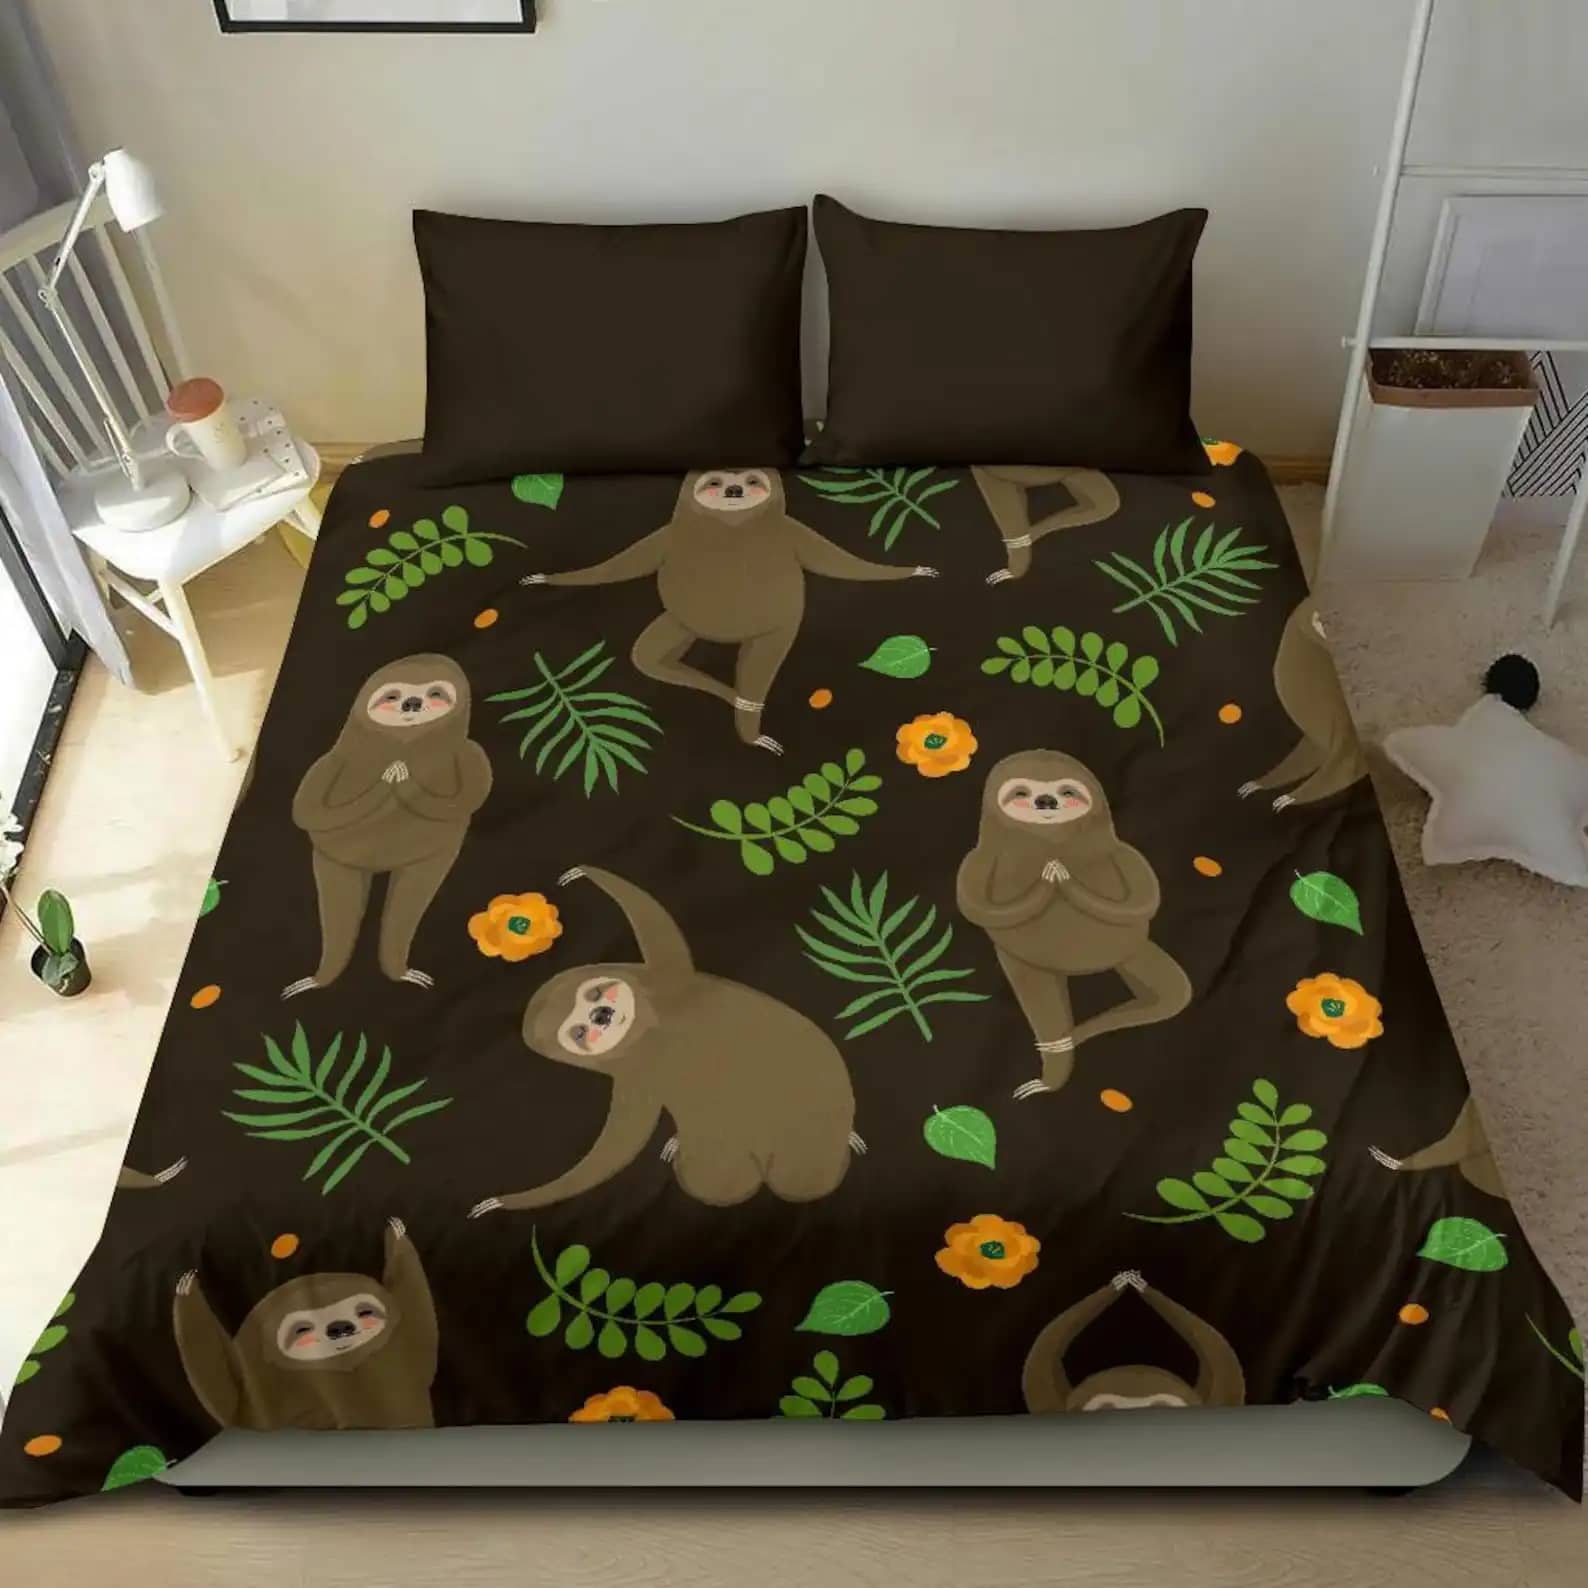 Luxurious Cute Sloth Doing Yoga Quilt Bedding Sets